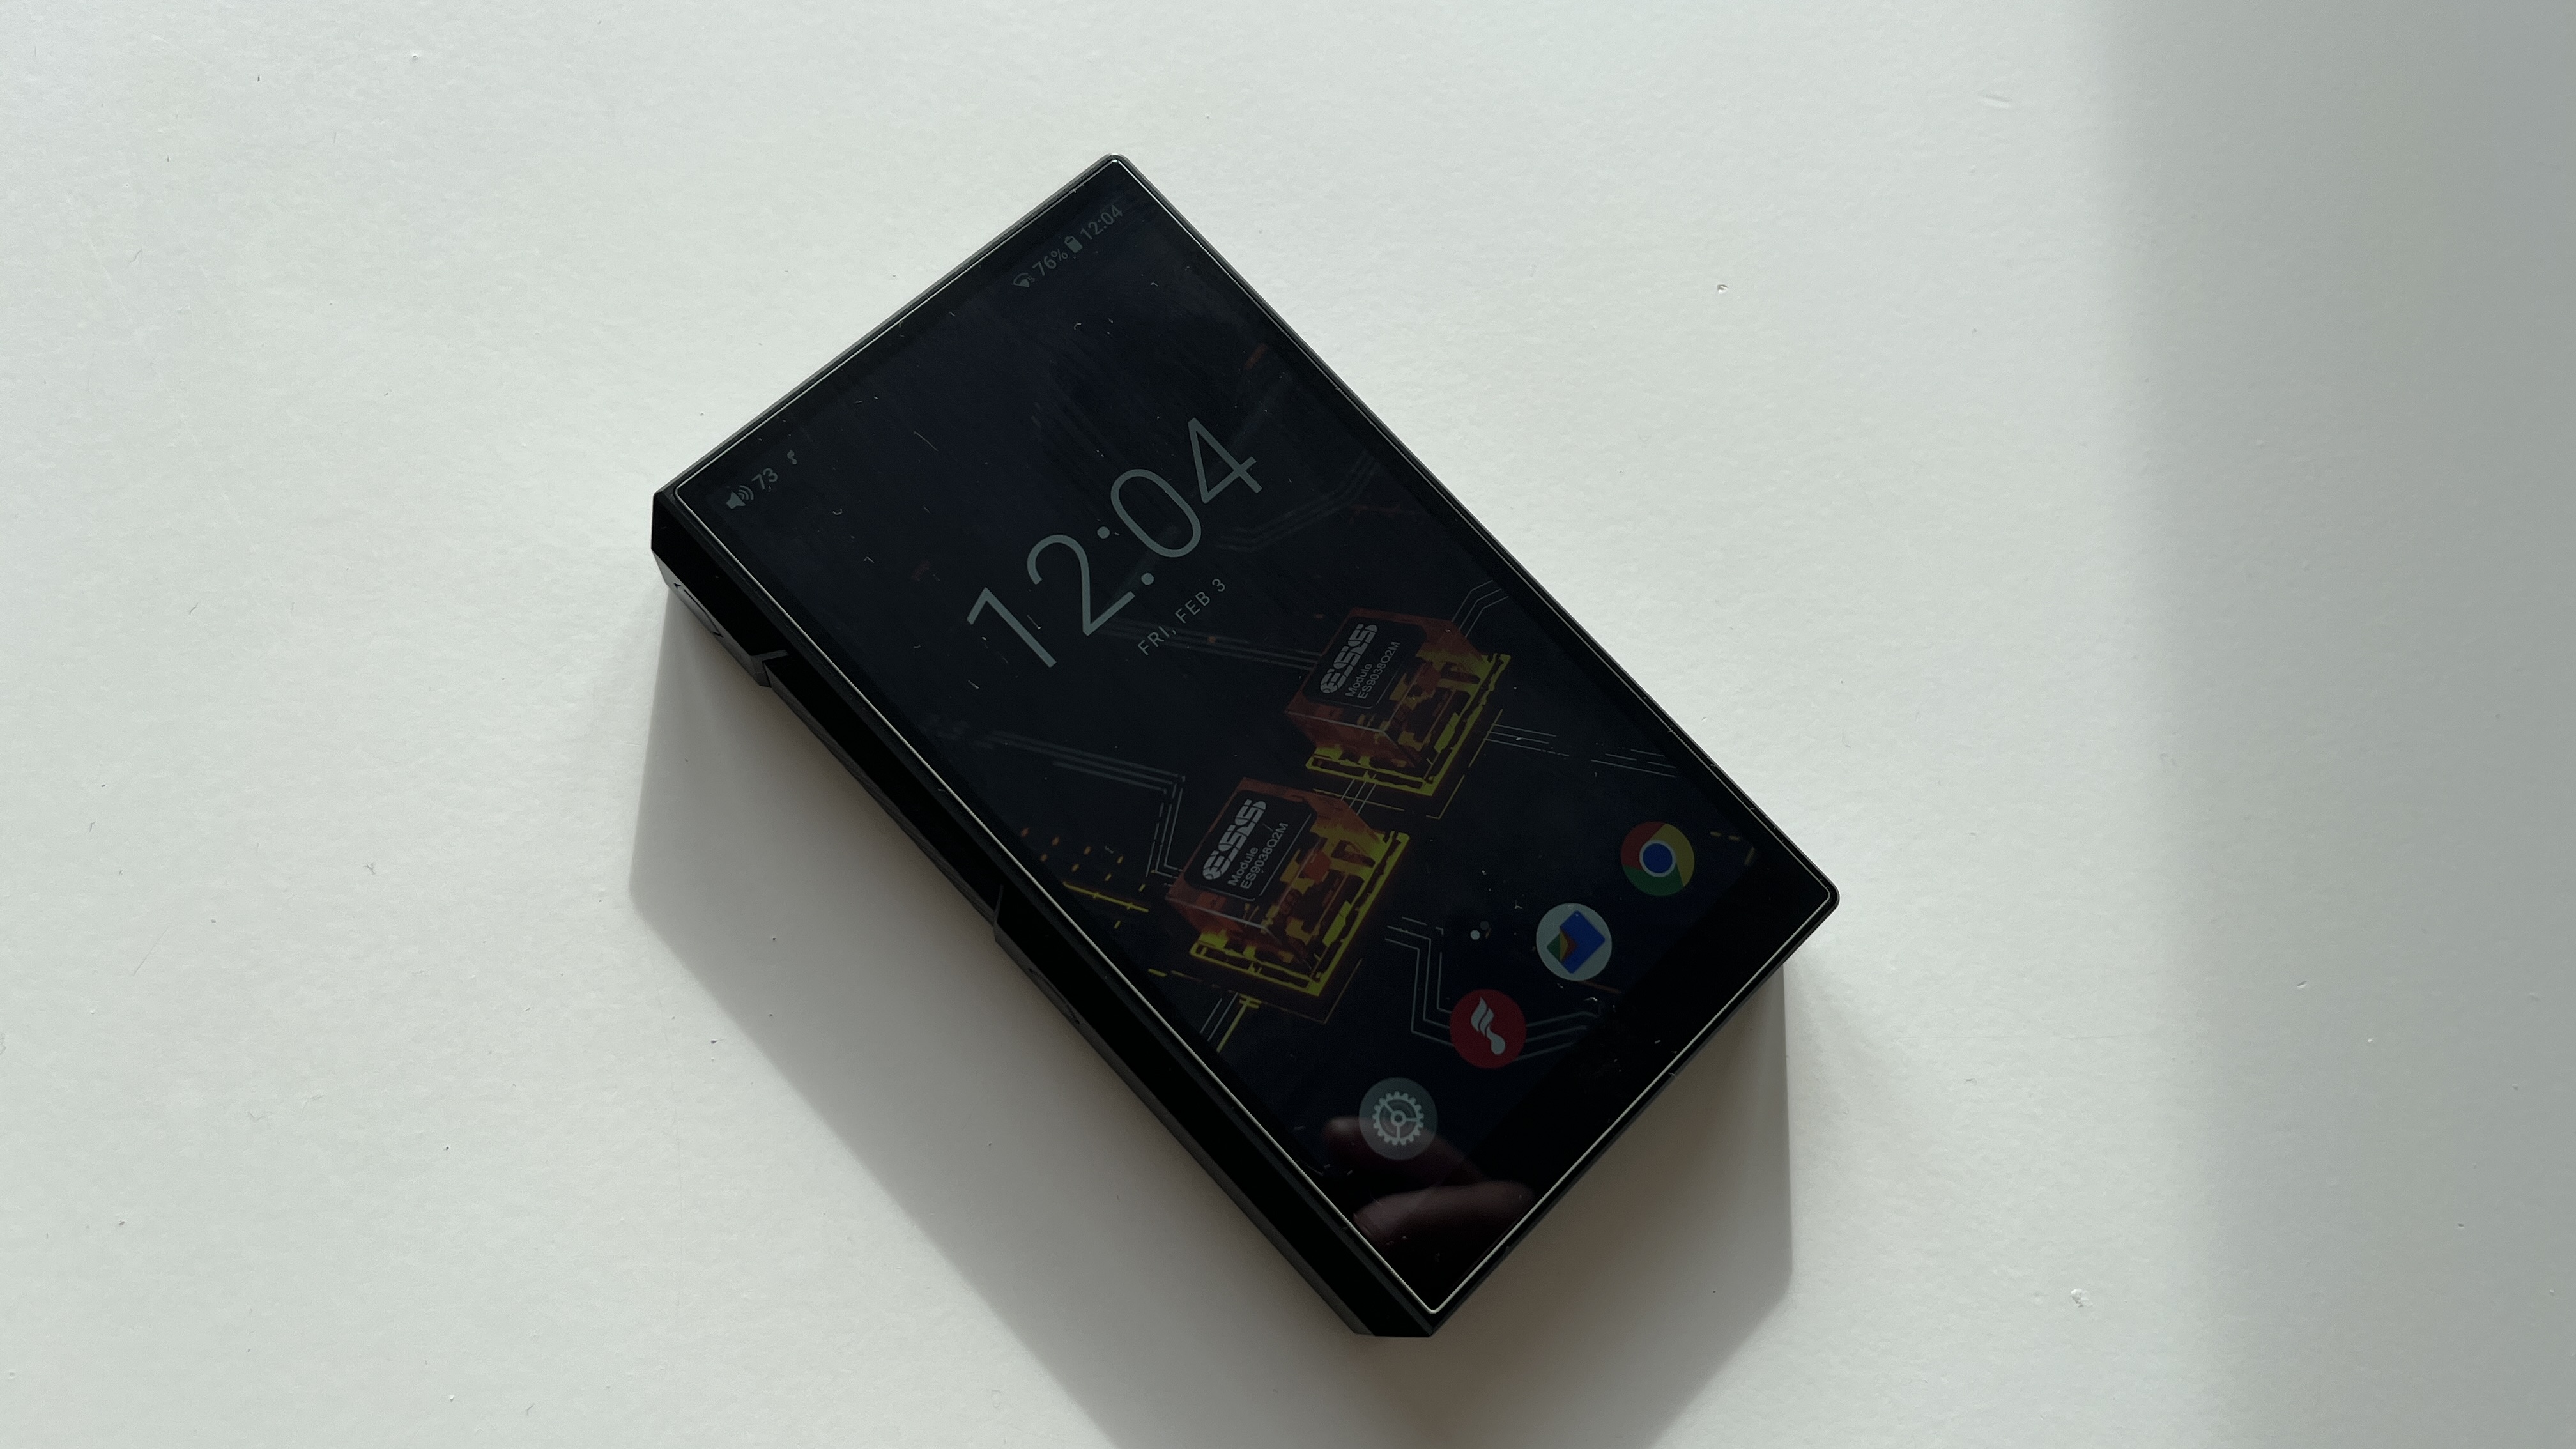 The FiiO M11S music player pictured on a white background